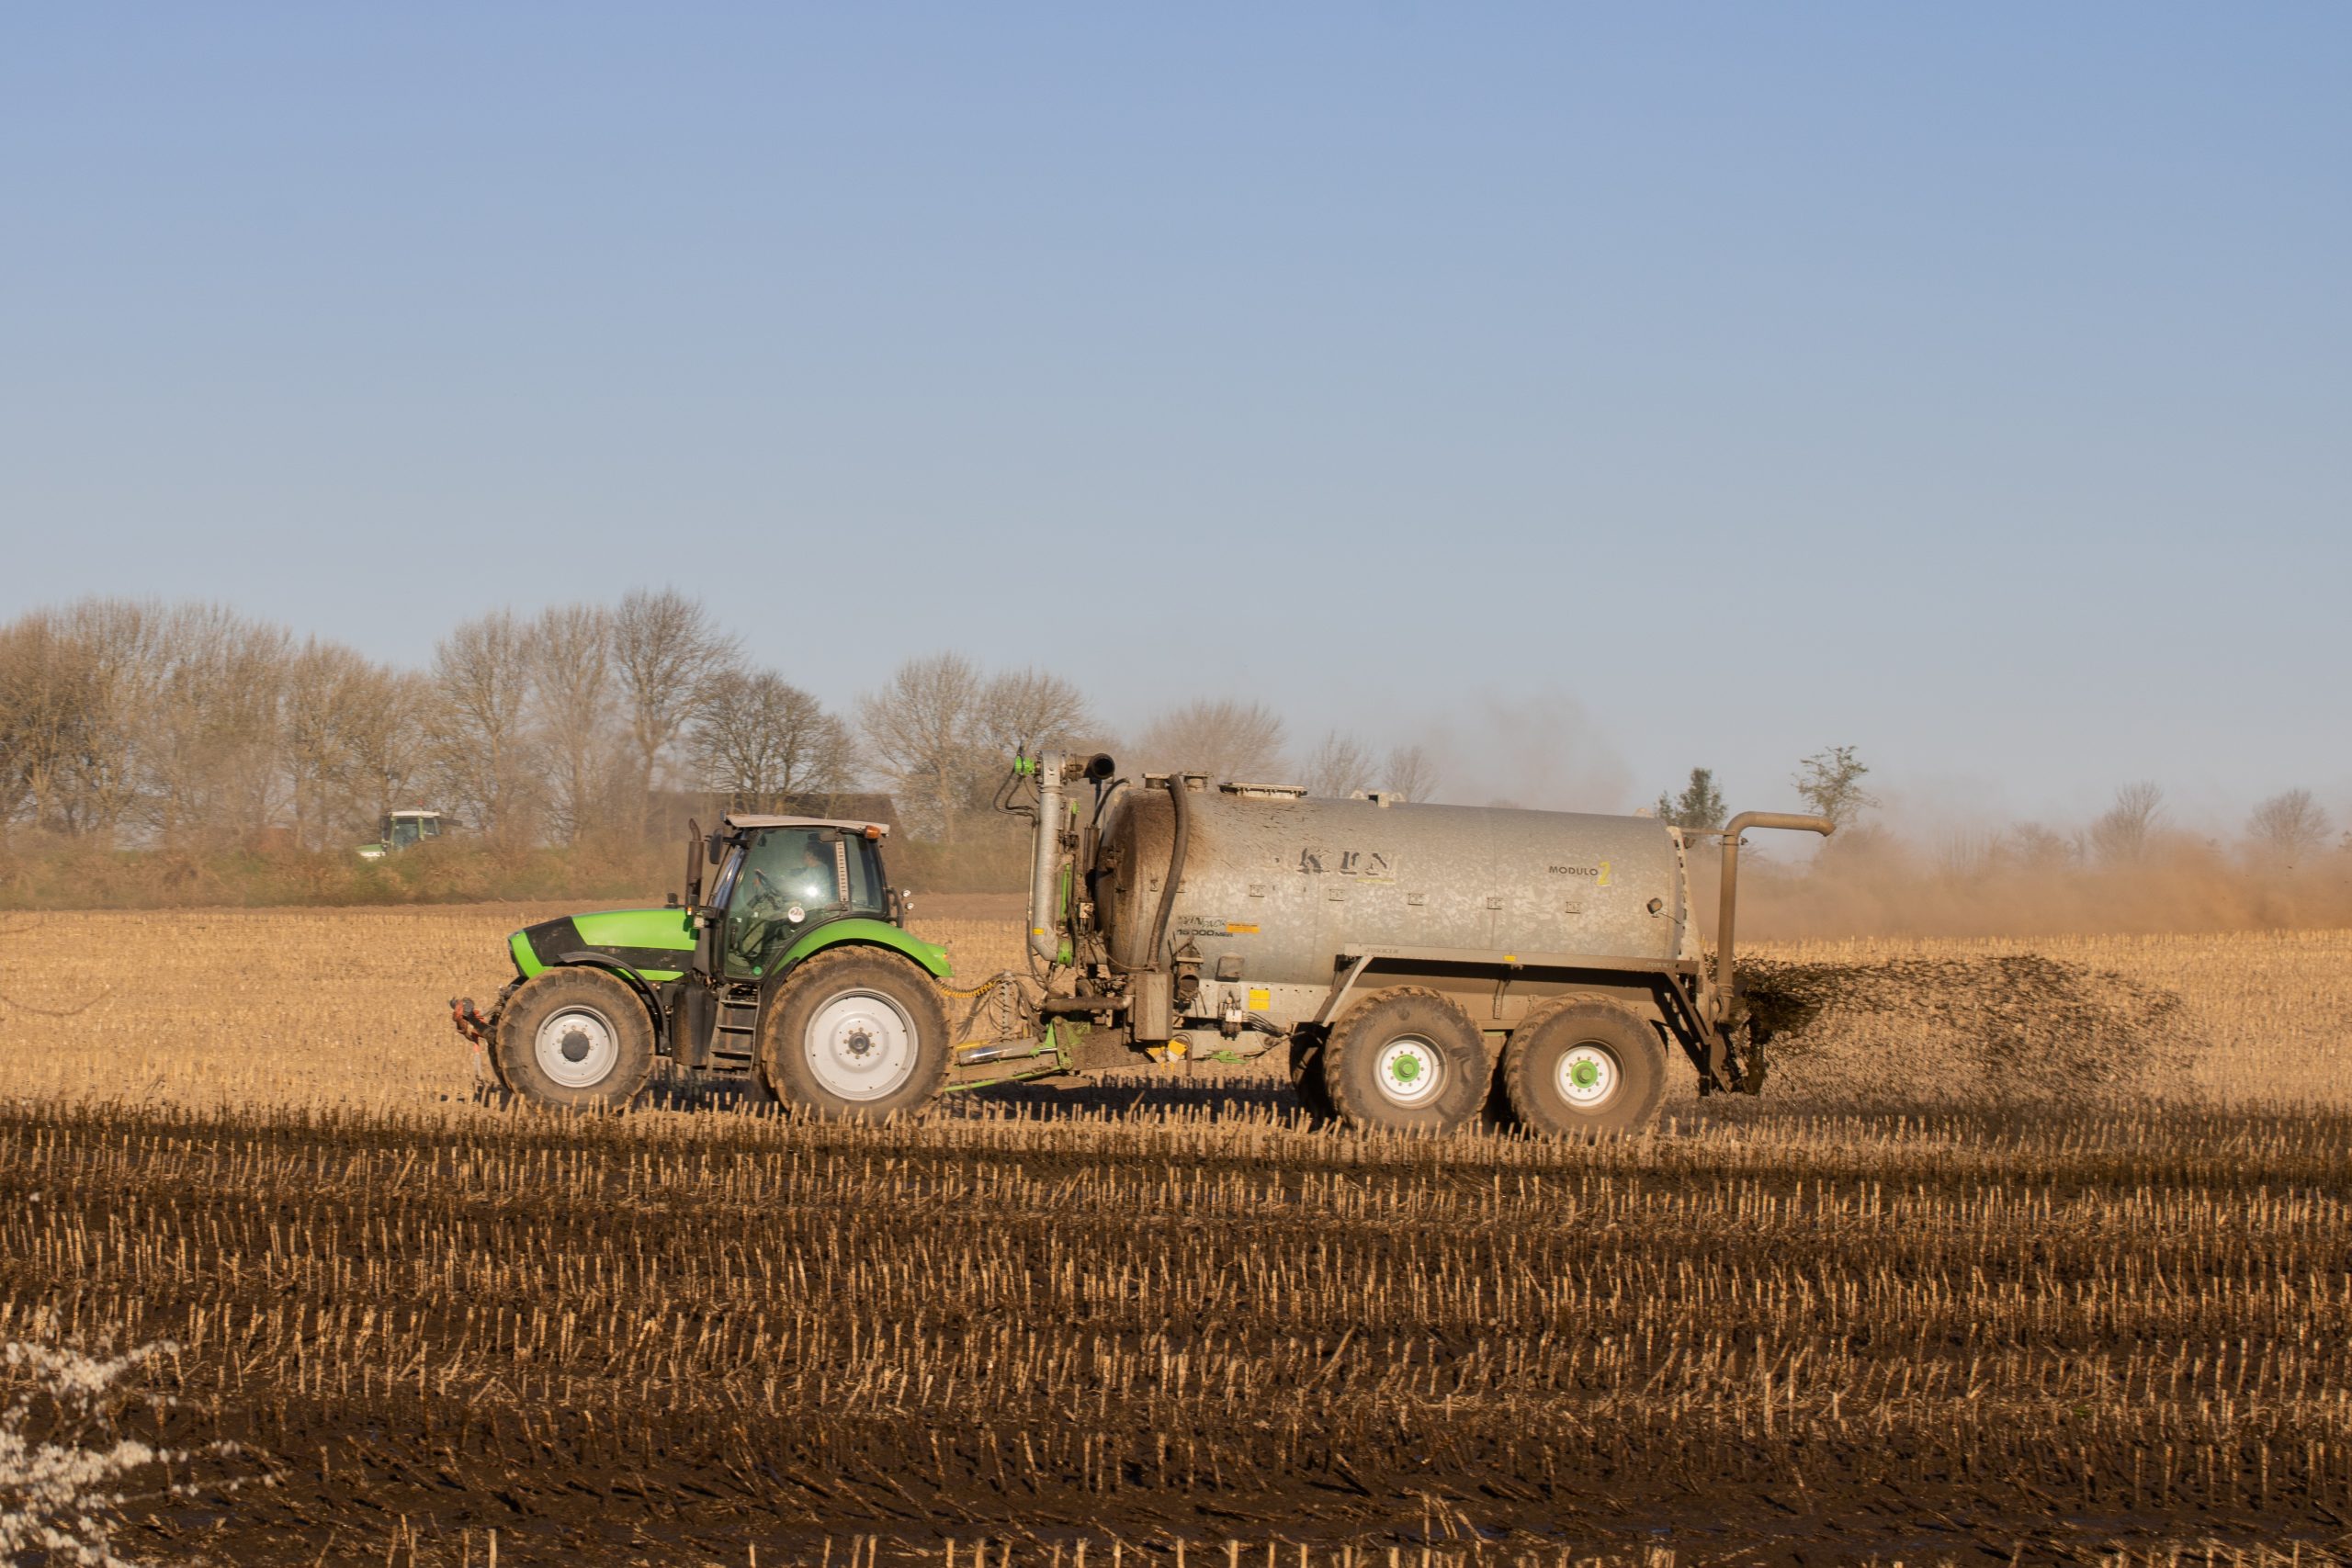 Applying manure to the fields